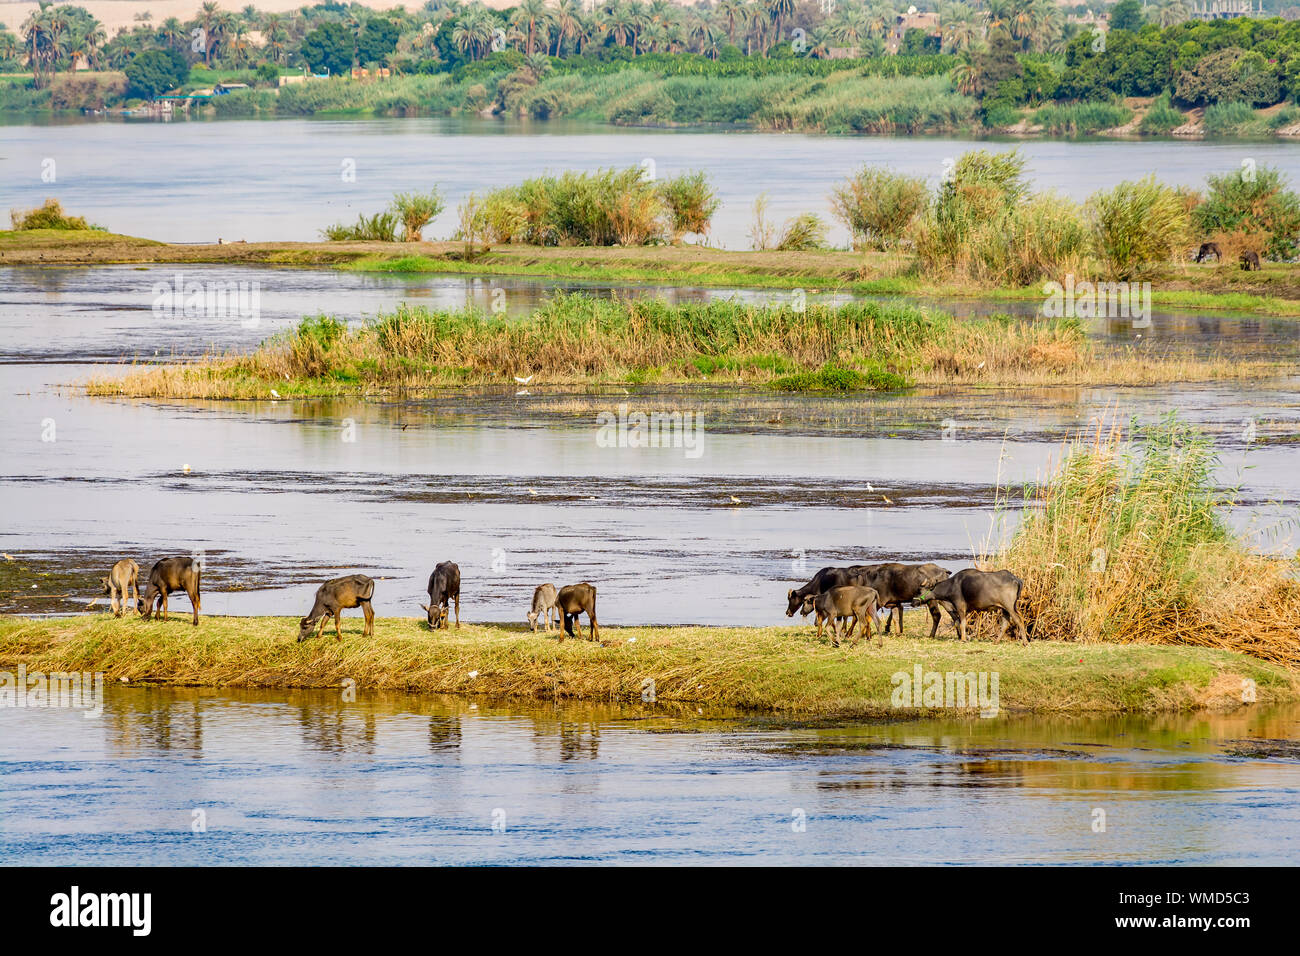 Cattle or livestock grazing on the bank of Nile river, Egypt Stock Photo -  Alamy